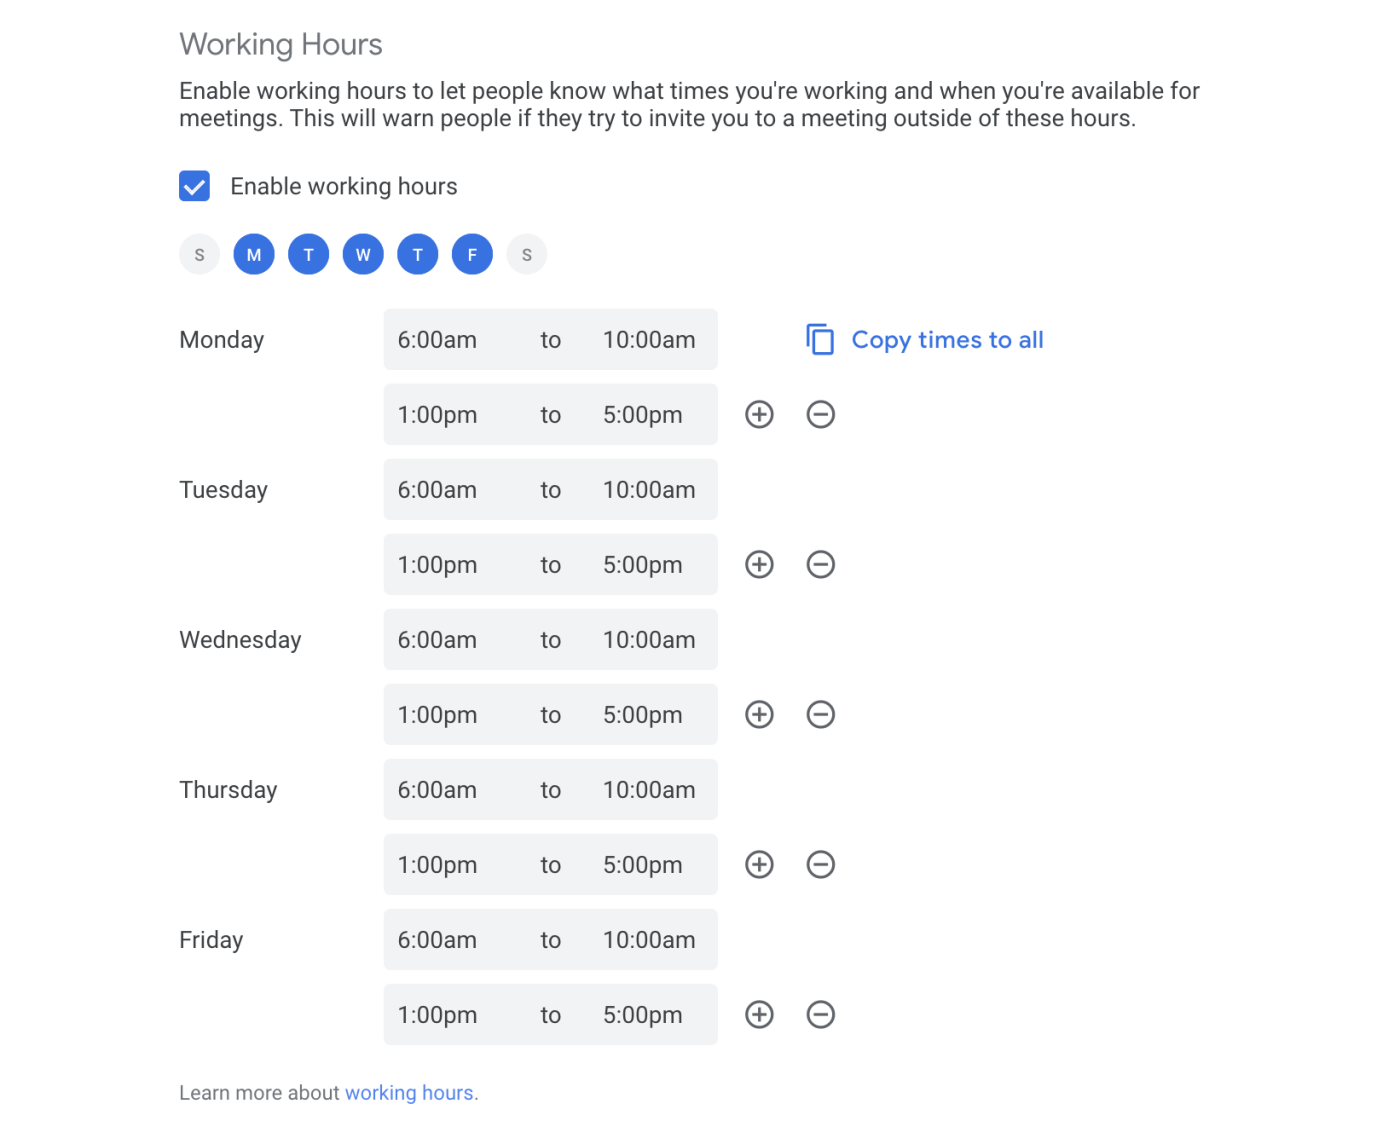 The Working Hours feature in Google Calendar, with each day M-F split between 6-10am and 1-5pm